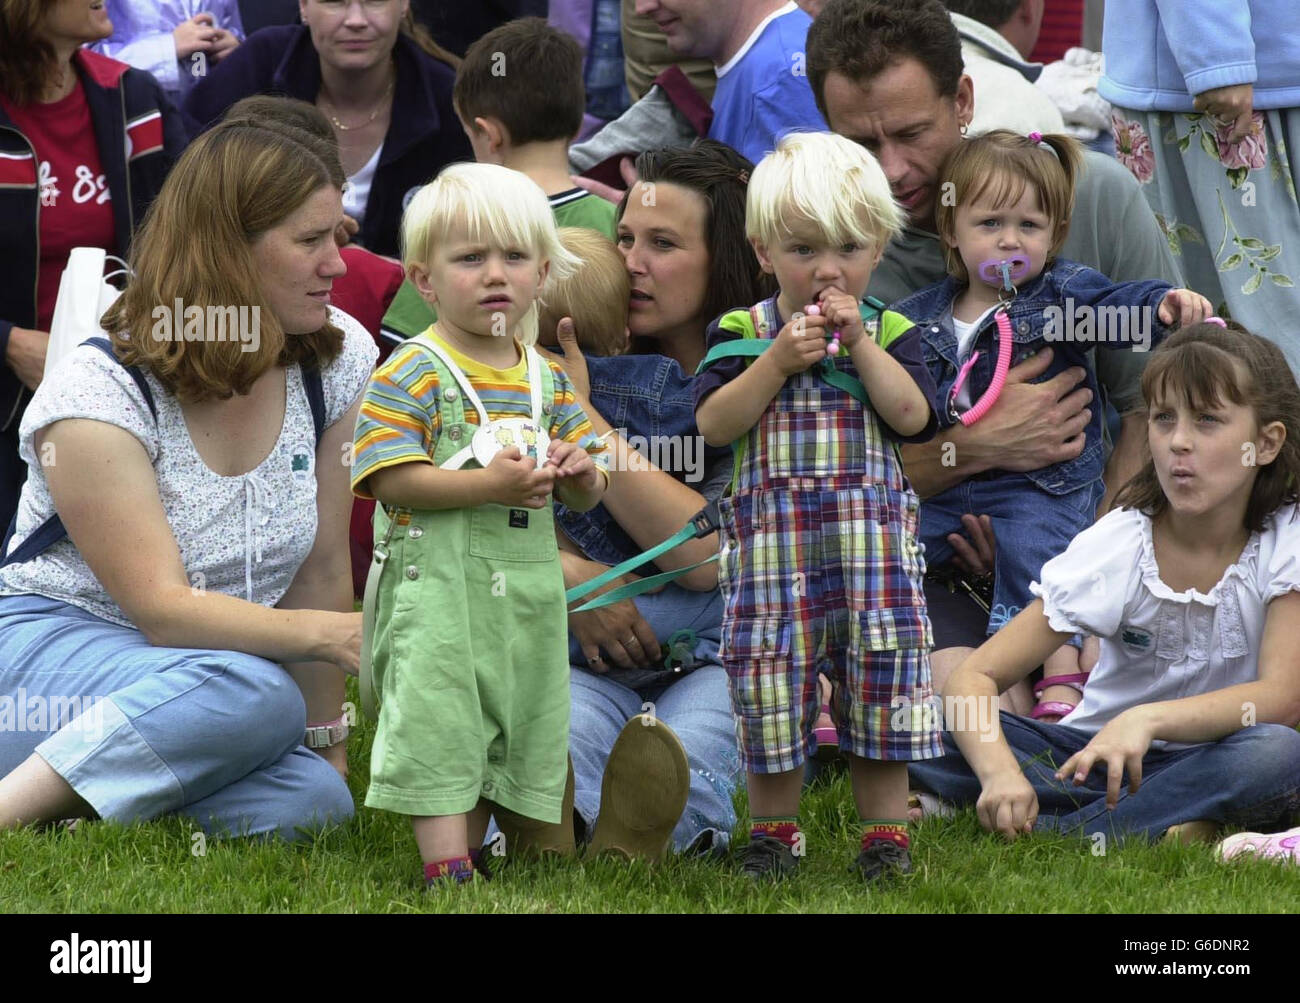 (l-r) Twin brothers Indie and Dominic Payne, 2, from Kidlington in Oxfordshire, observe a gathering of twins and multiple birth families organised by the Twins & Multiple Births Association (Tamba) at Blenheim Palace in Oxfordshire. * The national charity Tamba was organising the biggest ever gathering of twins and triplets in the UK to celebrate 25 years of supporting multiple birth families. Stock Photo